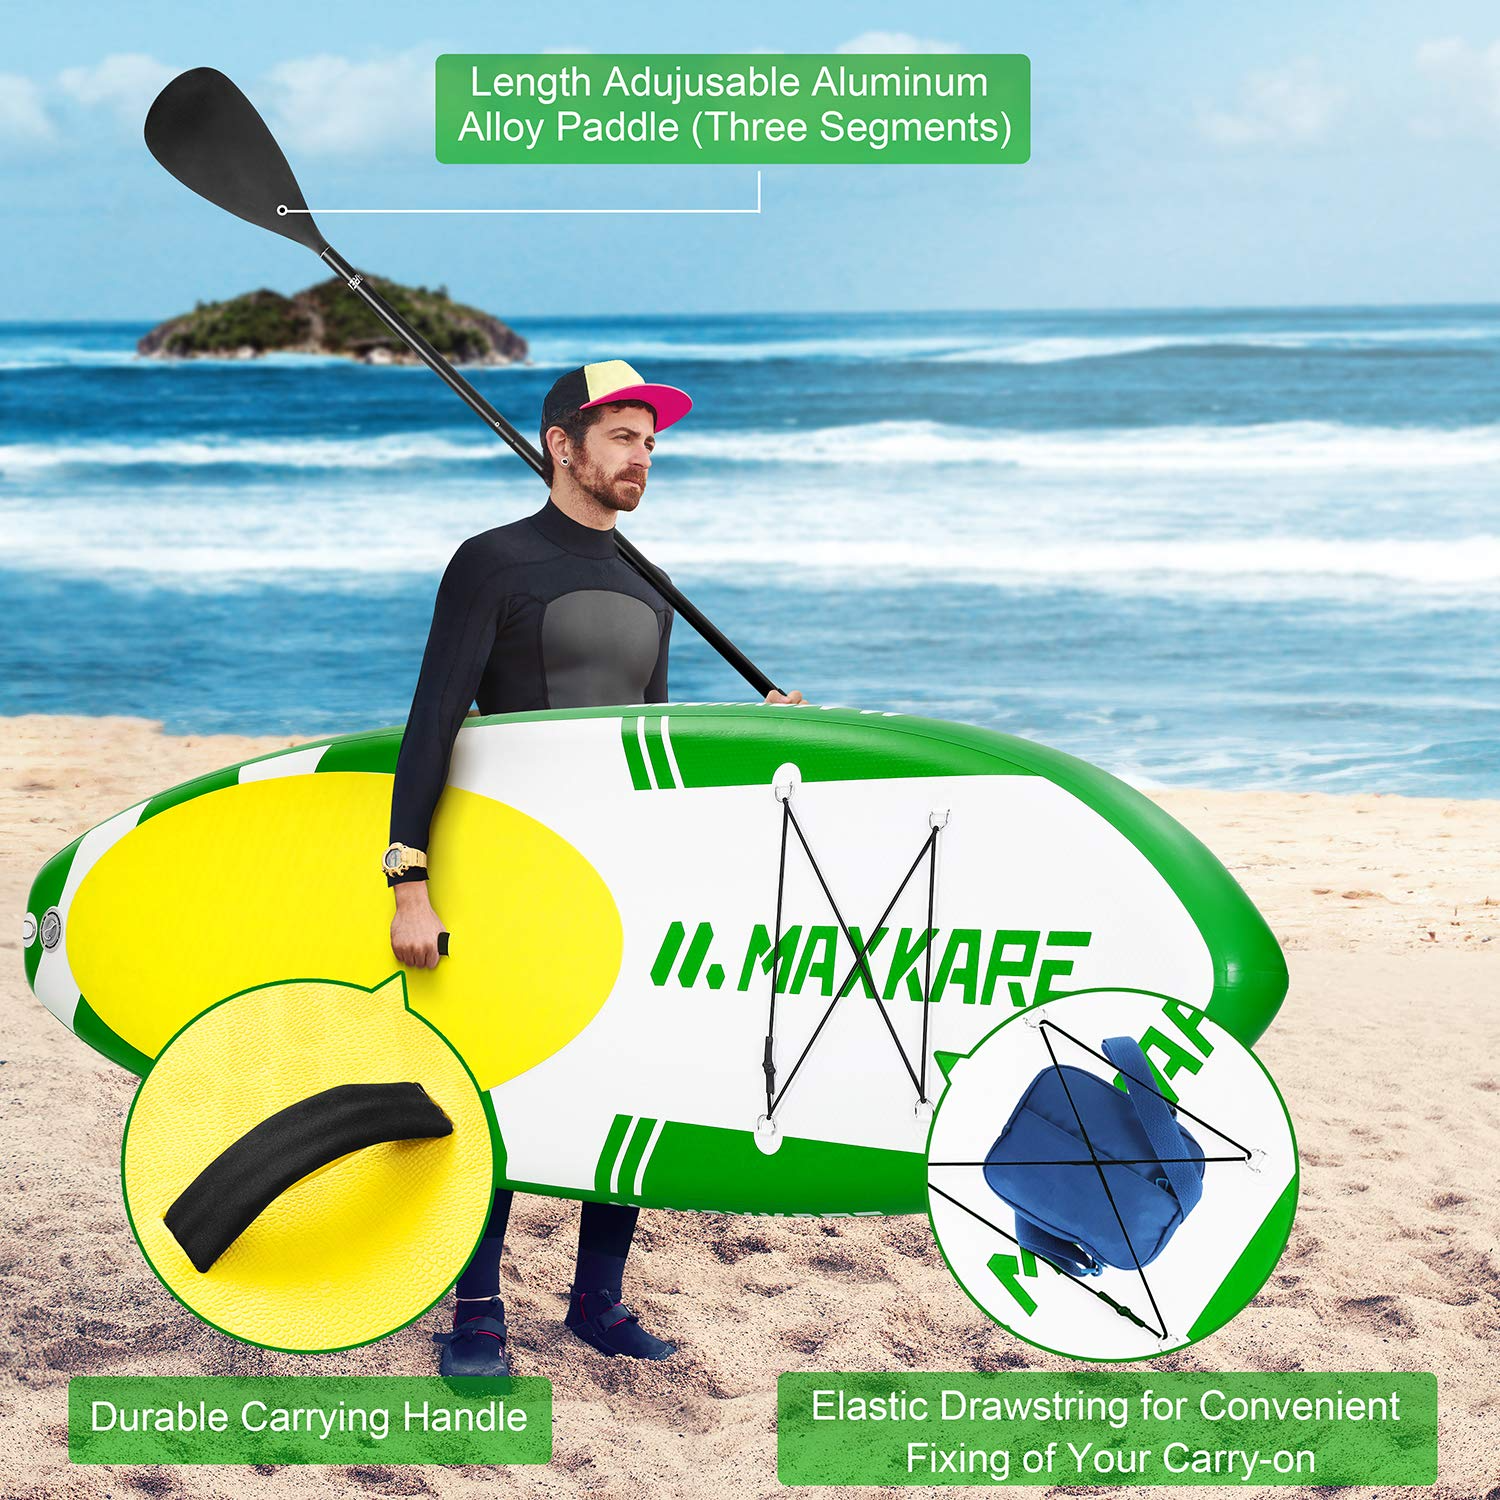 Stand Up Paddle Board Inflatable Paddle MAXKARE – SUP Board MaxKare